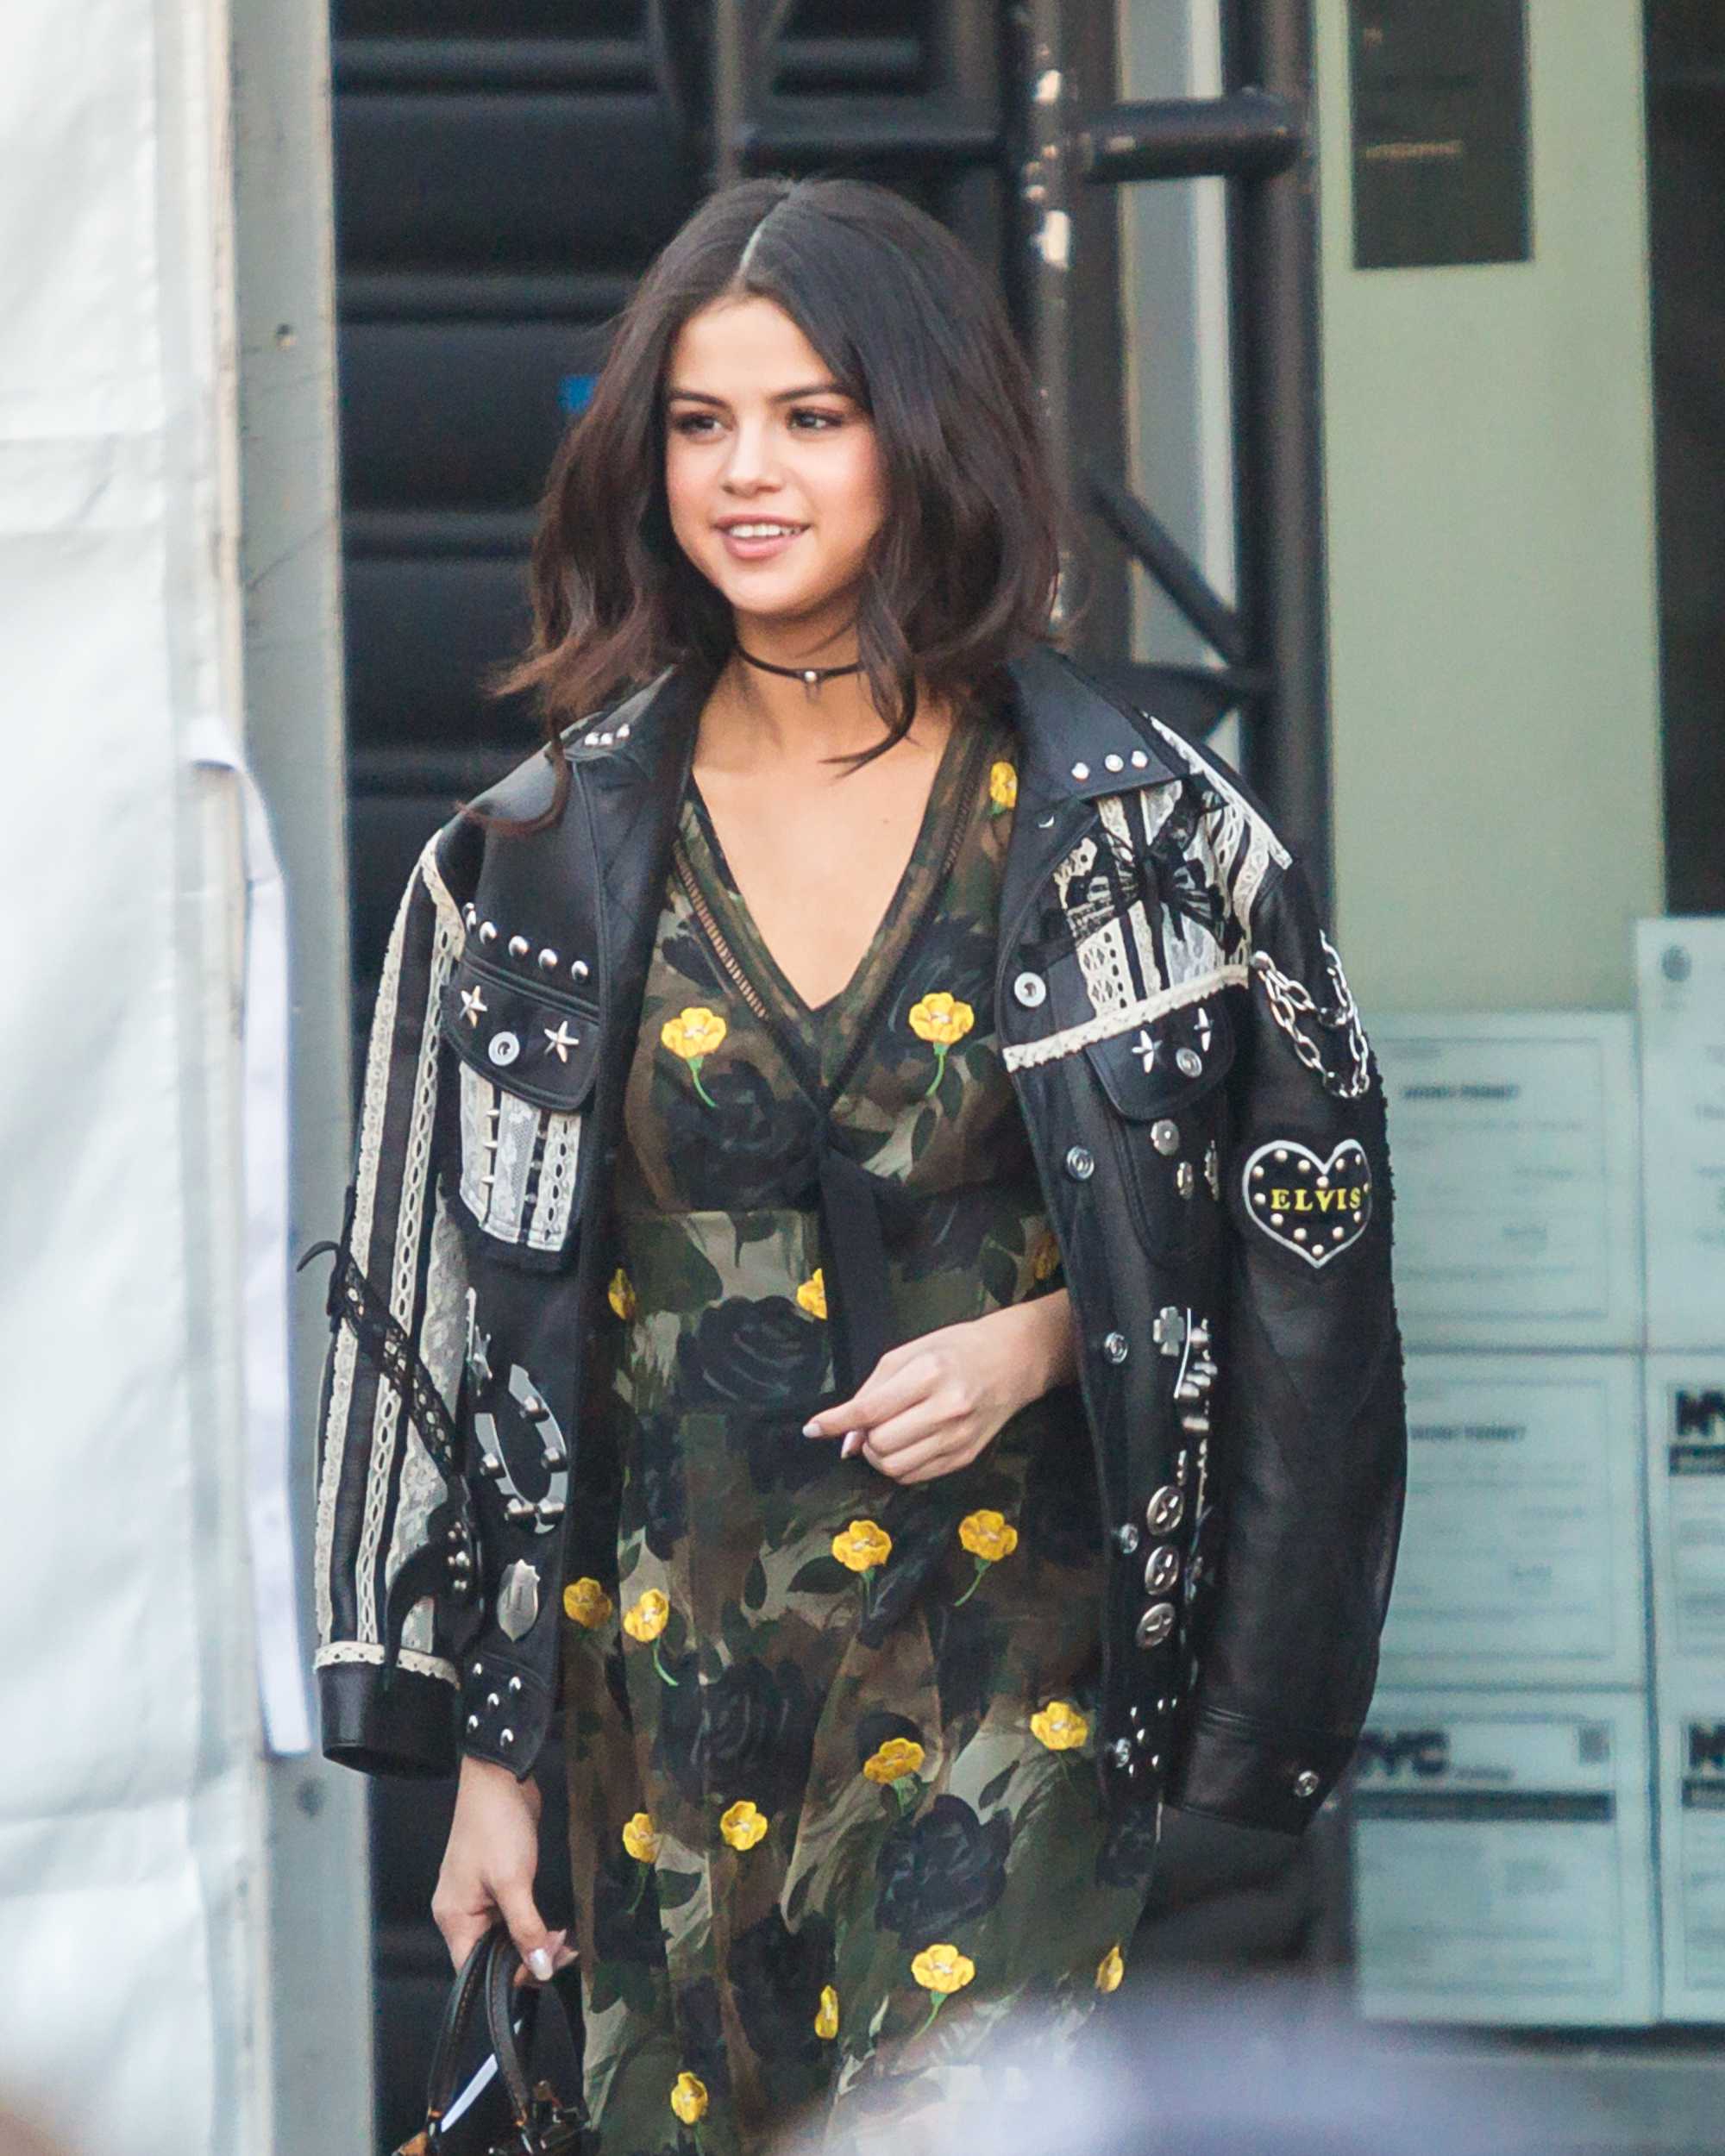 Selena_Gomez_-_Arrives_at_the_Coach_show_during_NYFW_in_New_York_City_on_Feb_14-04.jpg